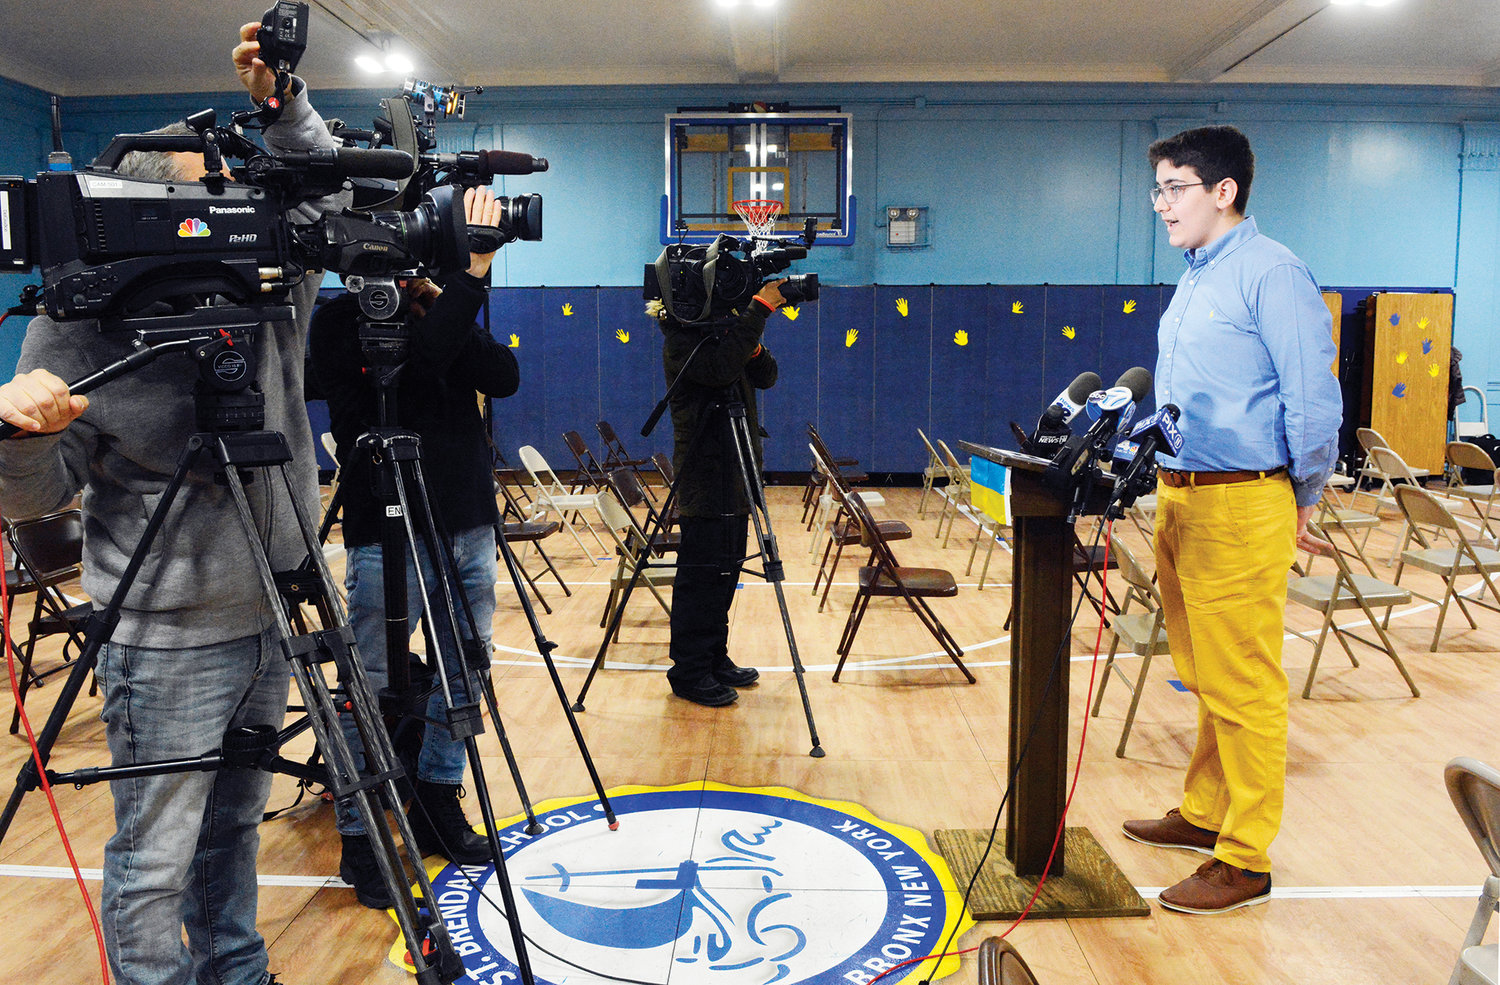 Kevin Corraj, an eighth-grader at St. Brendan’s School, the Bronx, speaks with the press at the school March 28, the Day of Prayer for Ukraine.